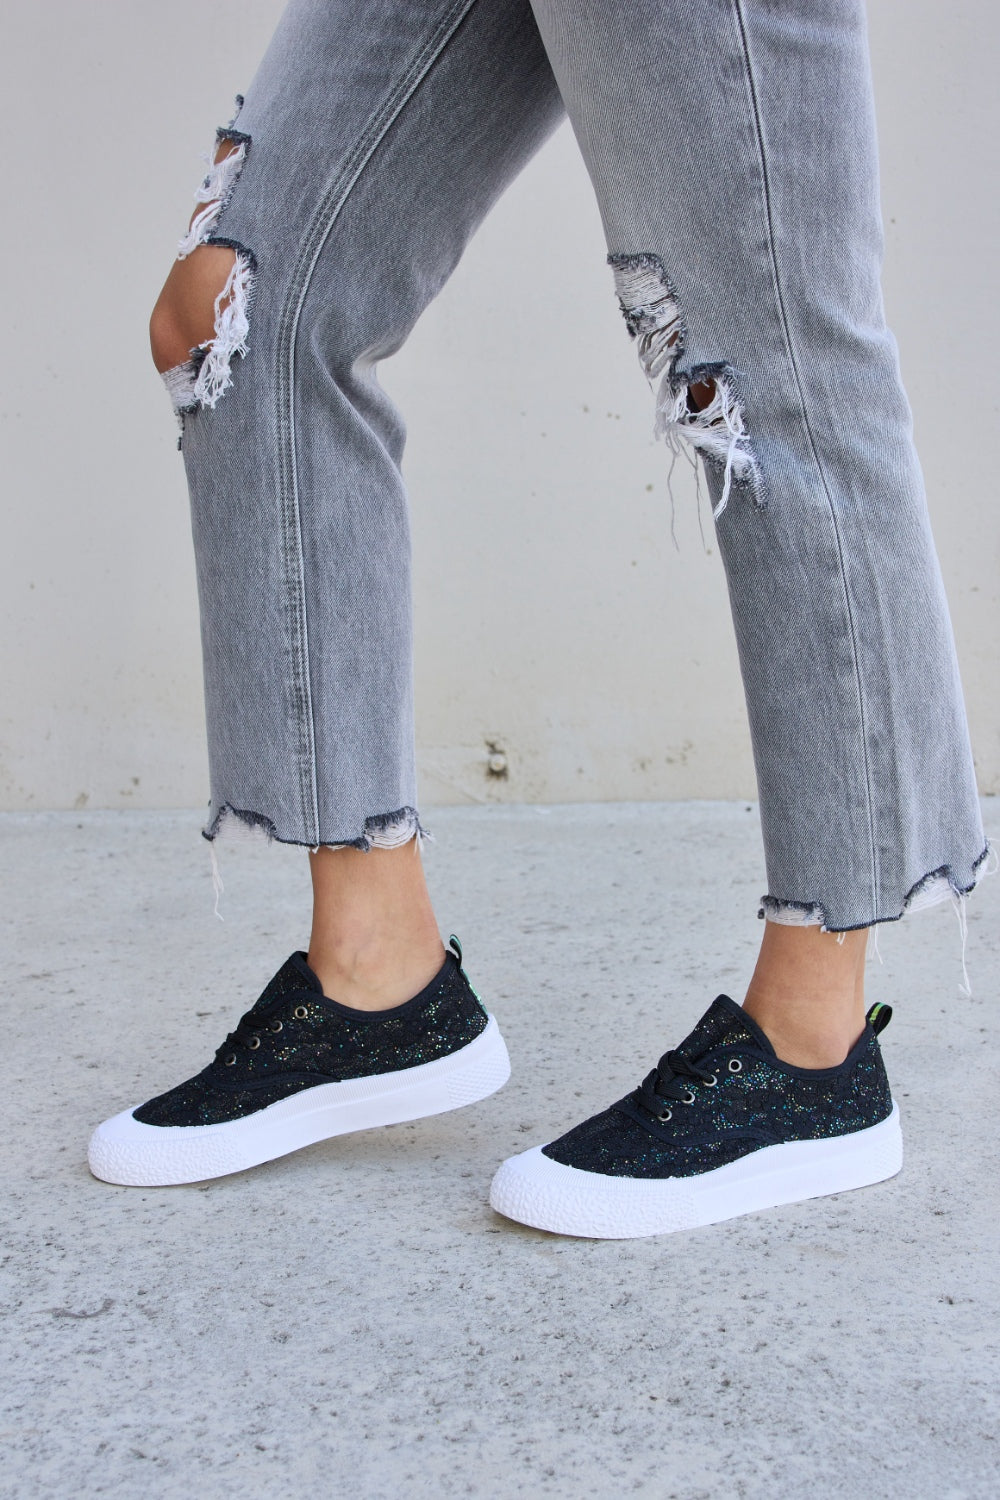 Forever Link Sequin Lace-Up Platform Sneakers: The Trendy, Sparkly Footwear Choice